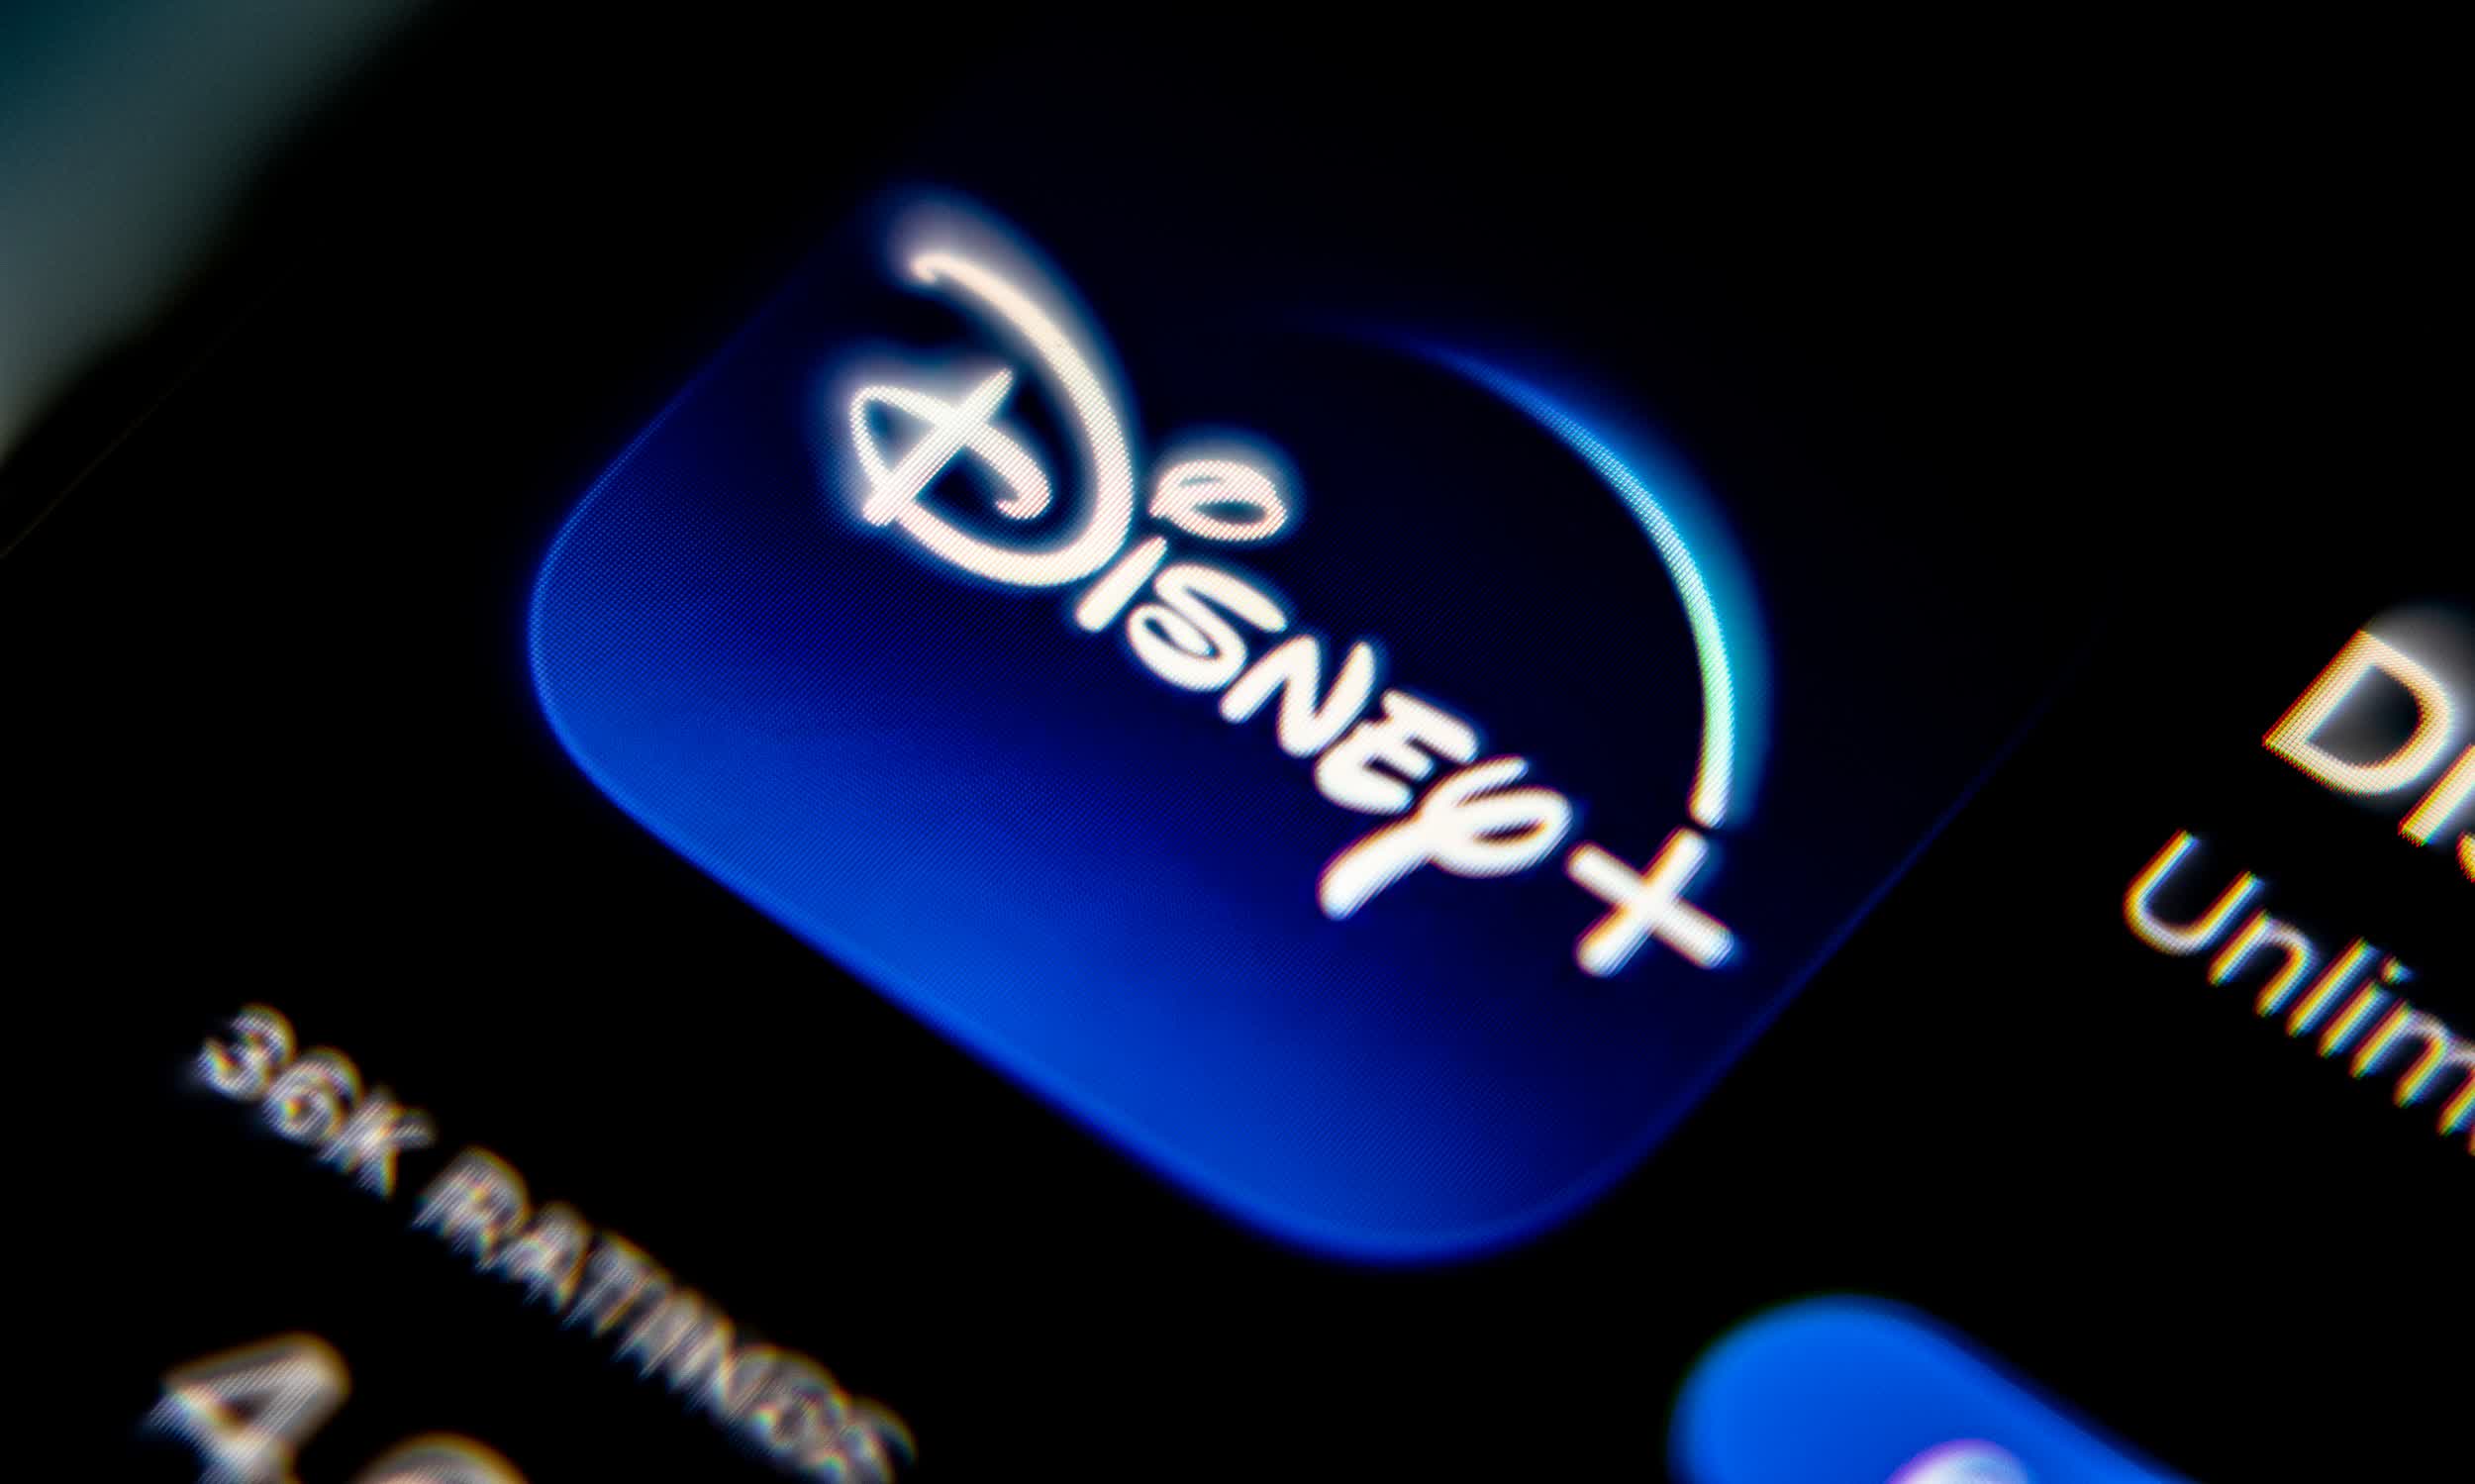 Disney+ will soon be more expensive, but you can lock in the current rate now